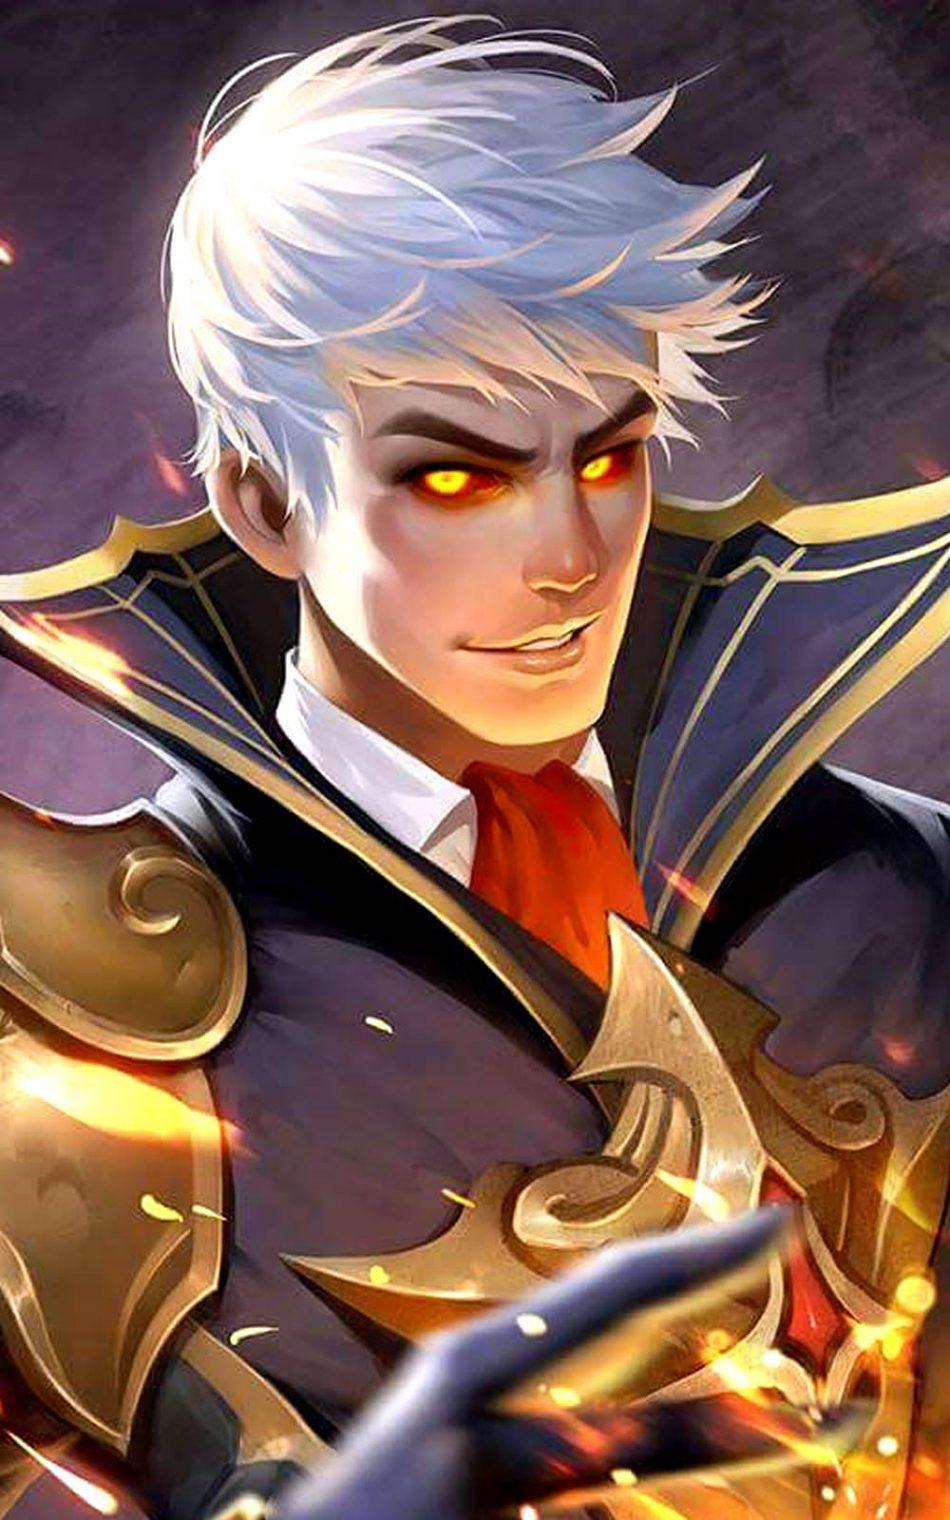 Download The Fiery Inferno Alucard Mobile Legends Free Pure 4K Ultra